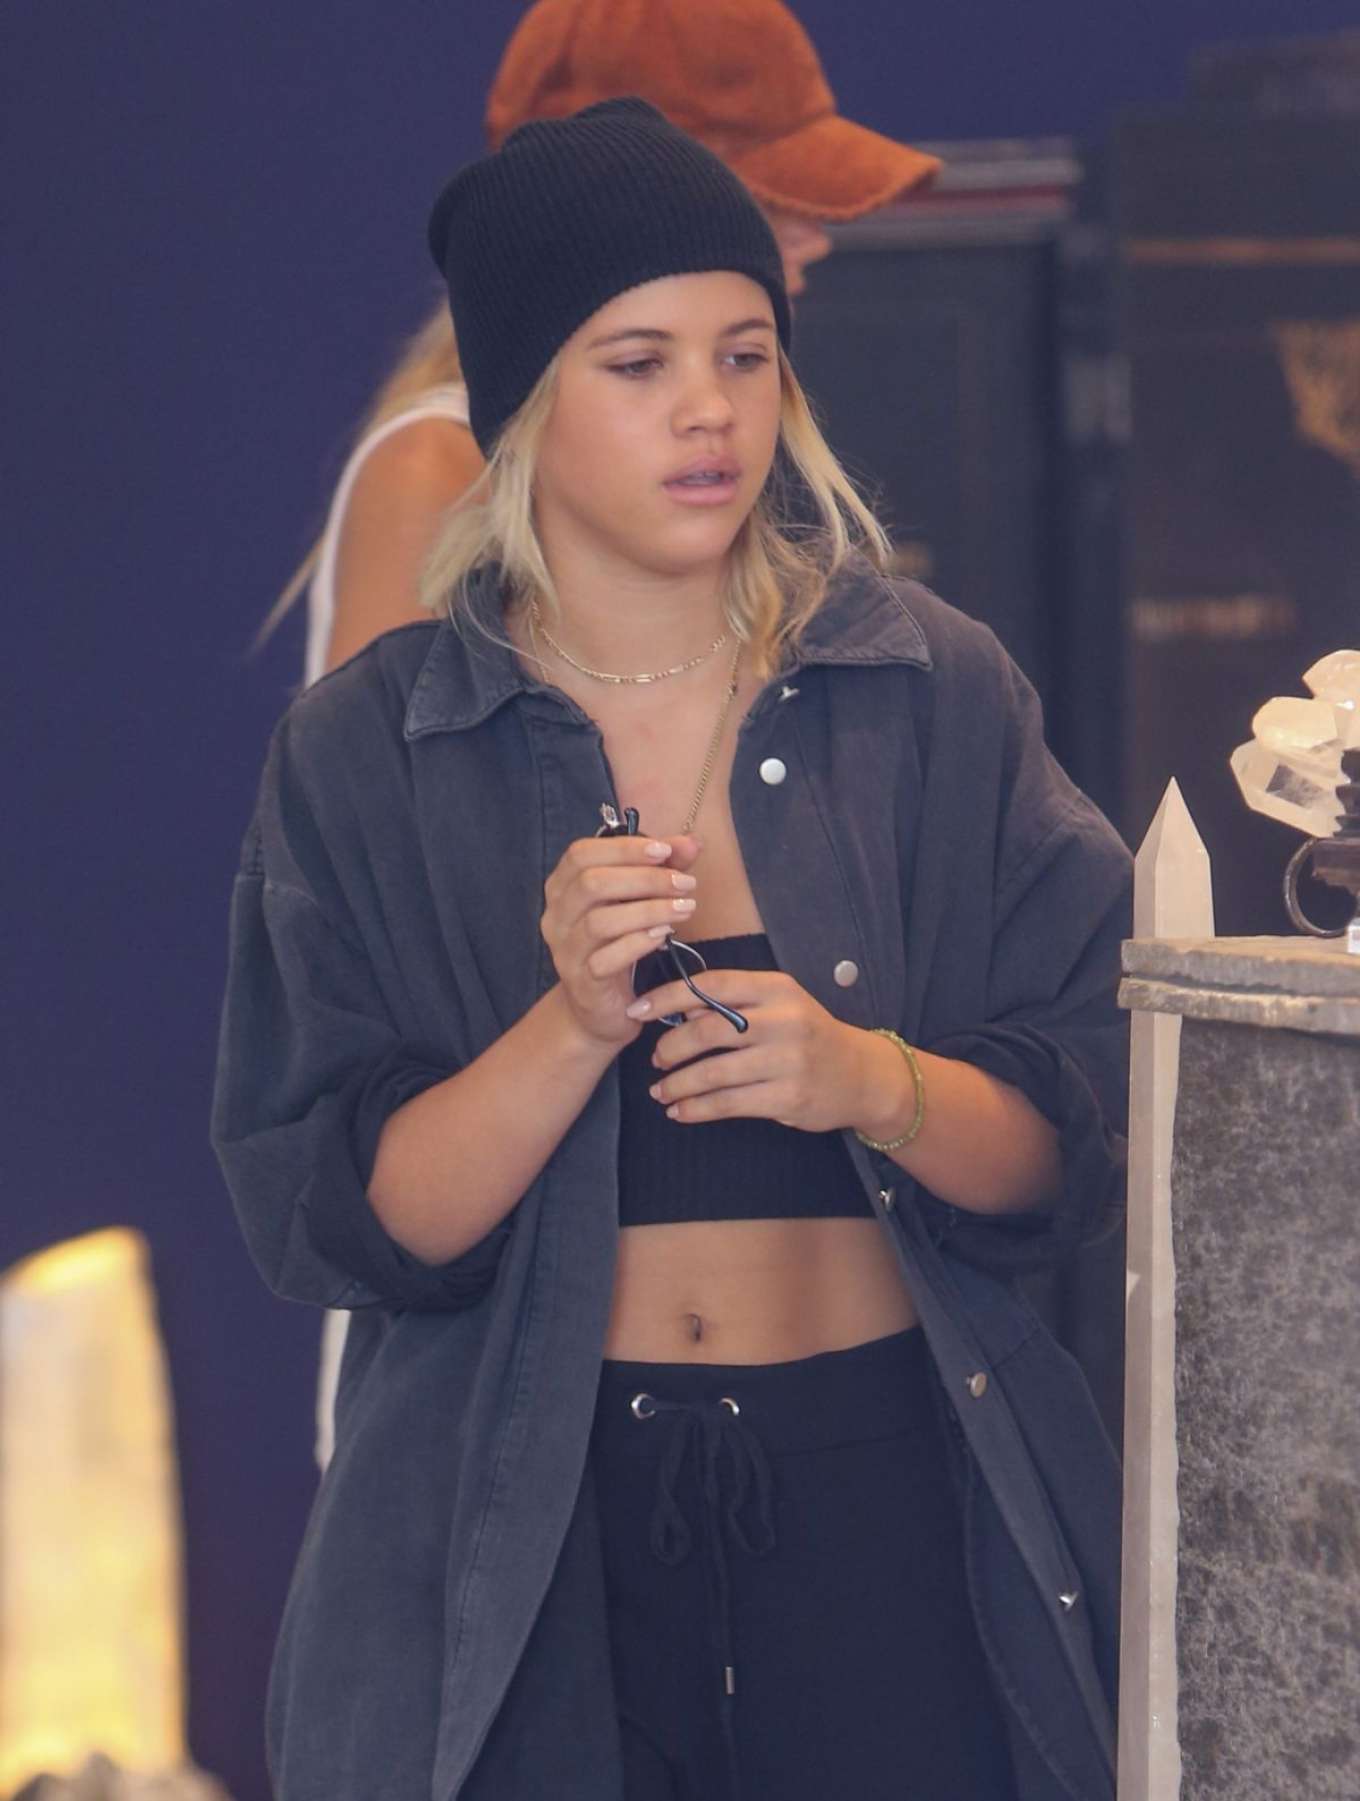 Sofia Richie at Fred Segal in West Hollywood